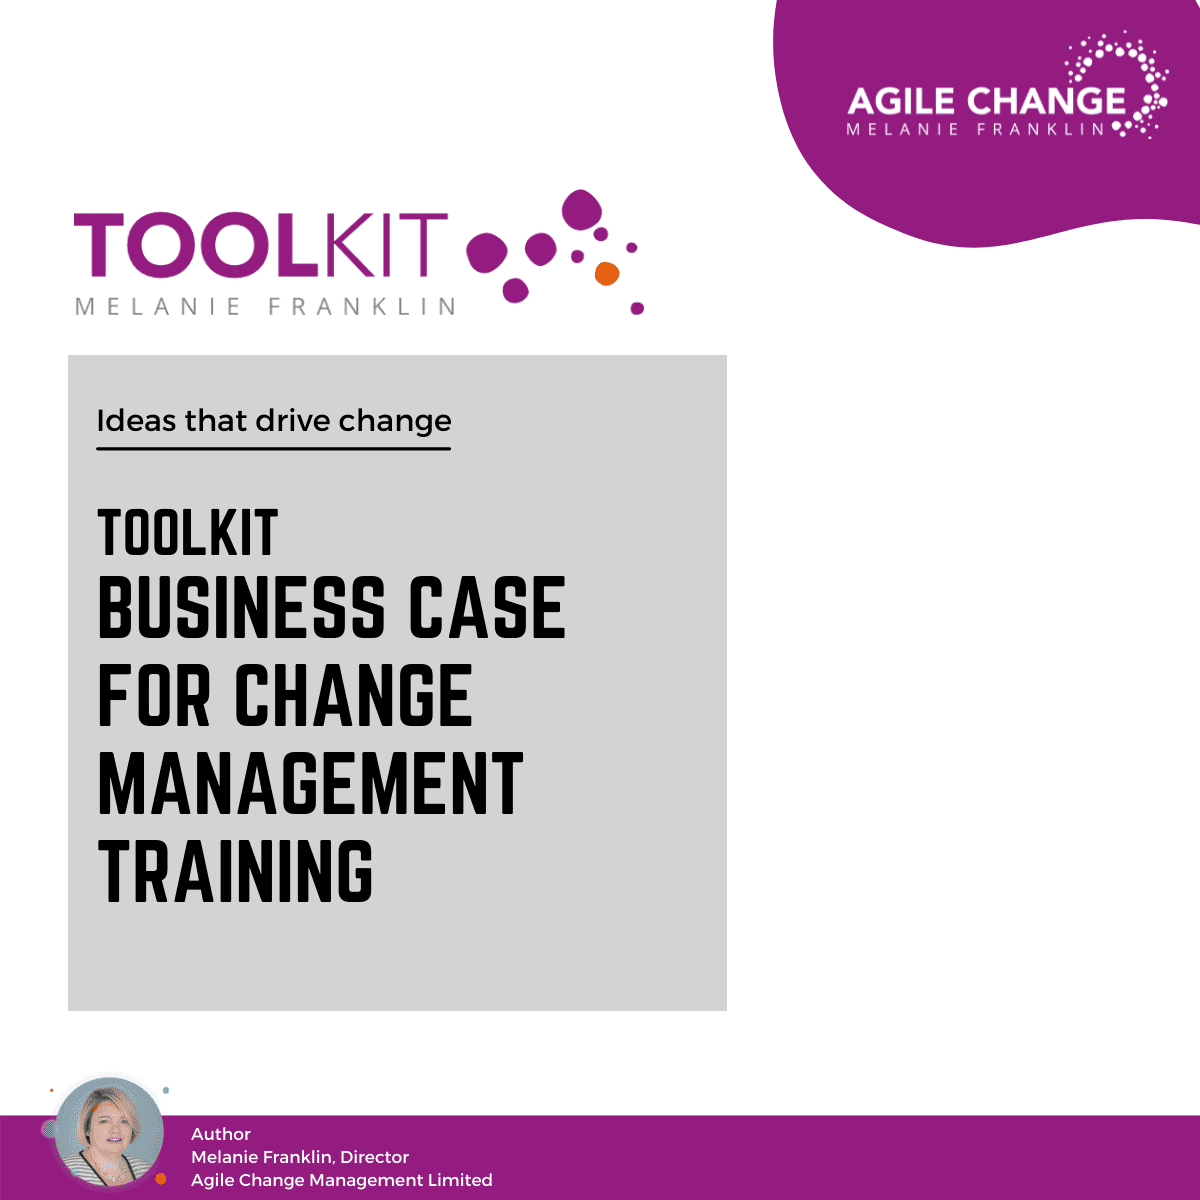 How to build a business case for Agile Change training